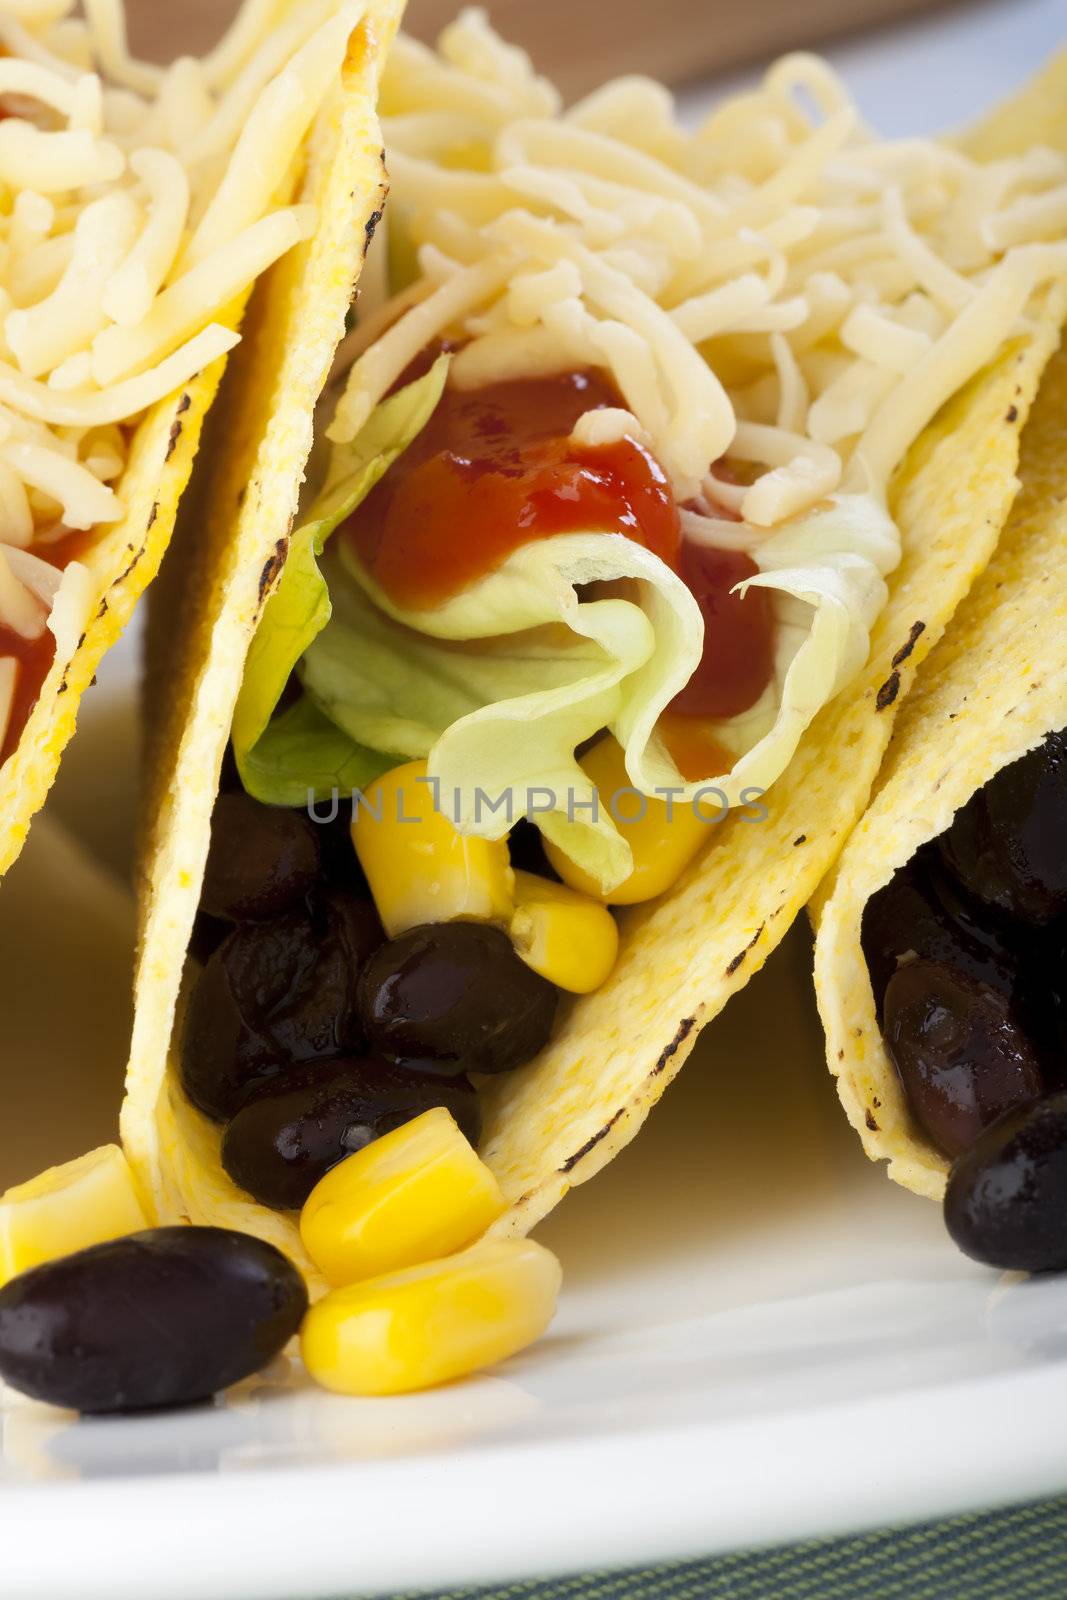 Homemade vegetarian tacos with black beans and sweet corn.